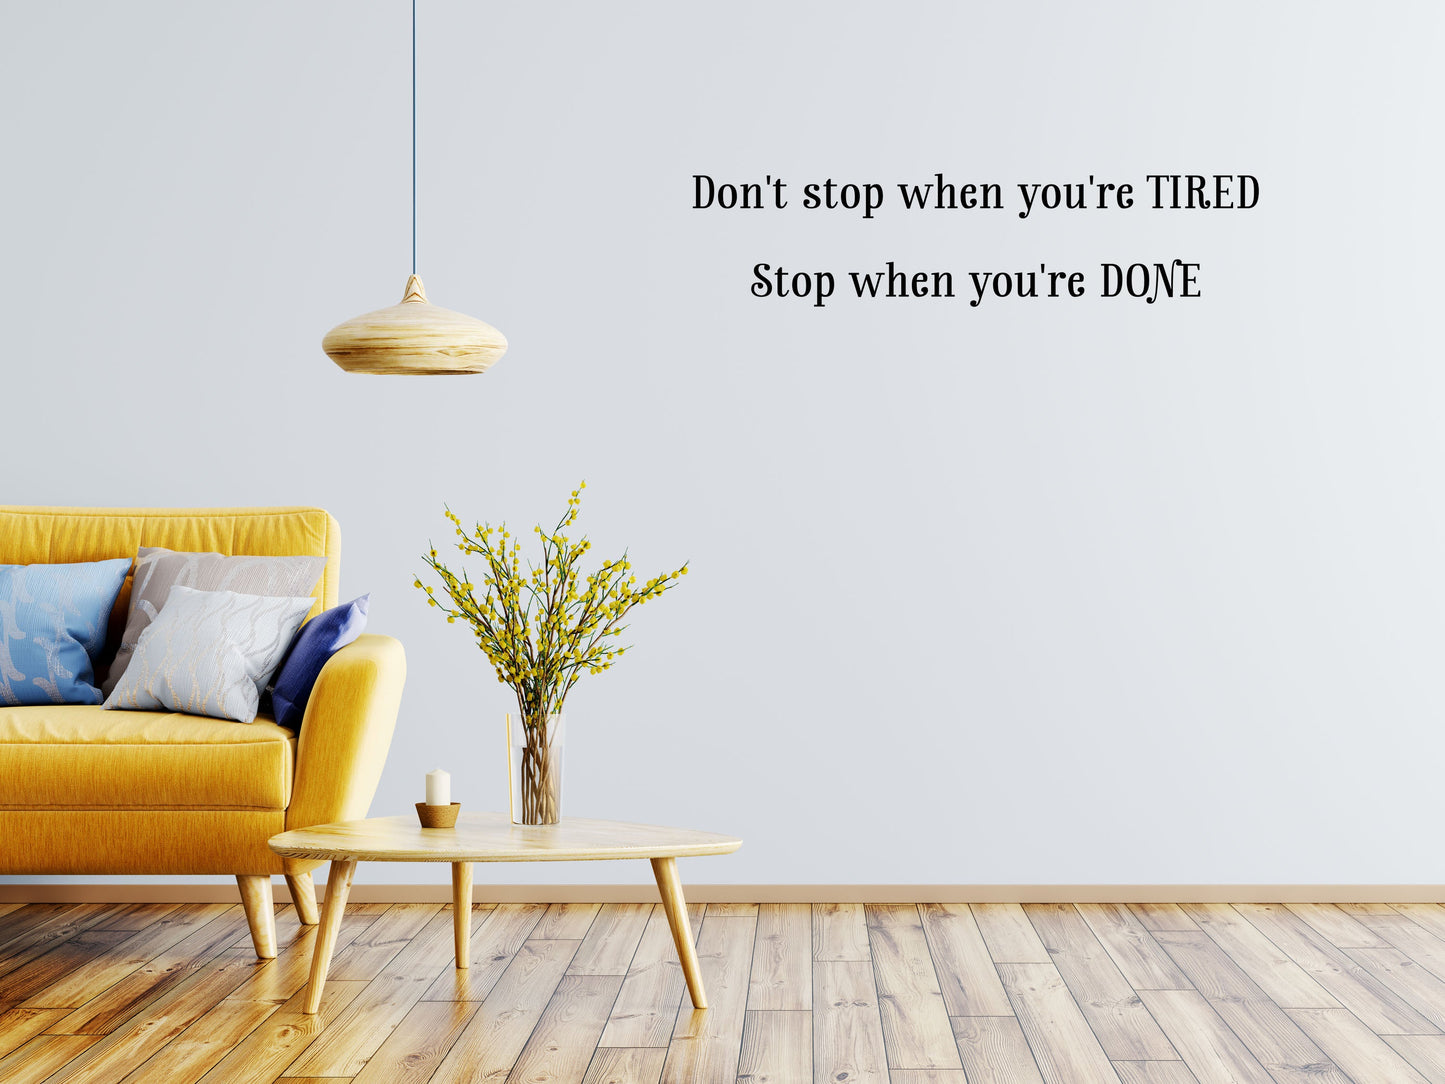 Don't Stop When You're Tired Stop When You're Done - Inspirational Wall Decals Vinyl Wall Decal Inspirational Wall Signs 